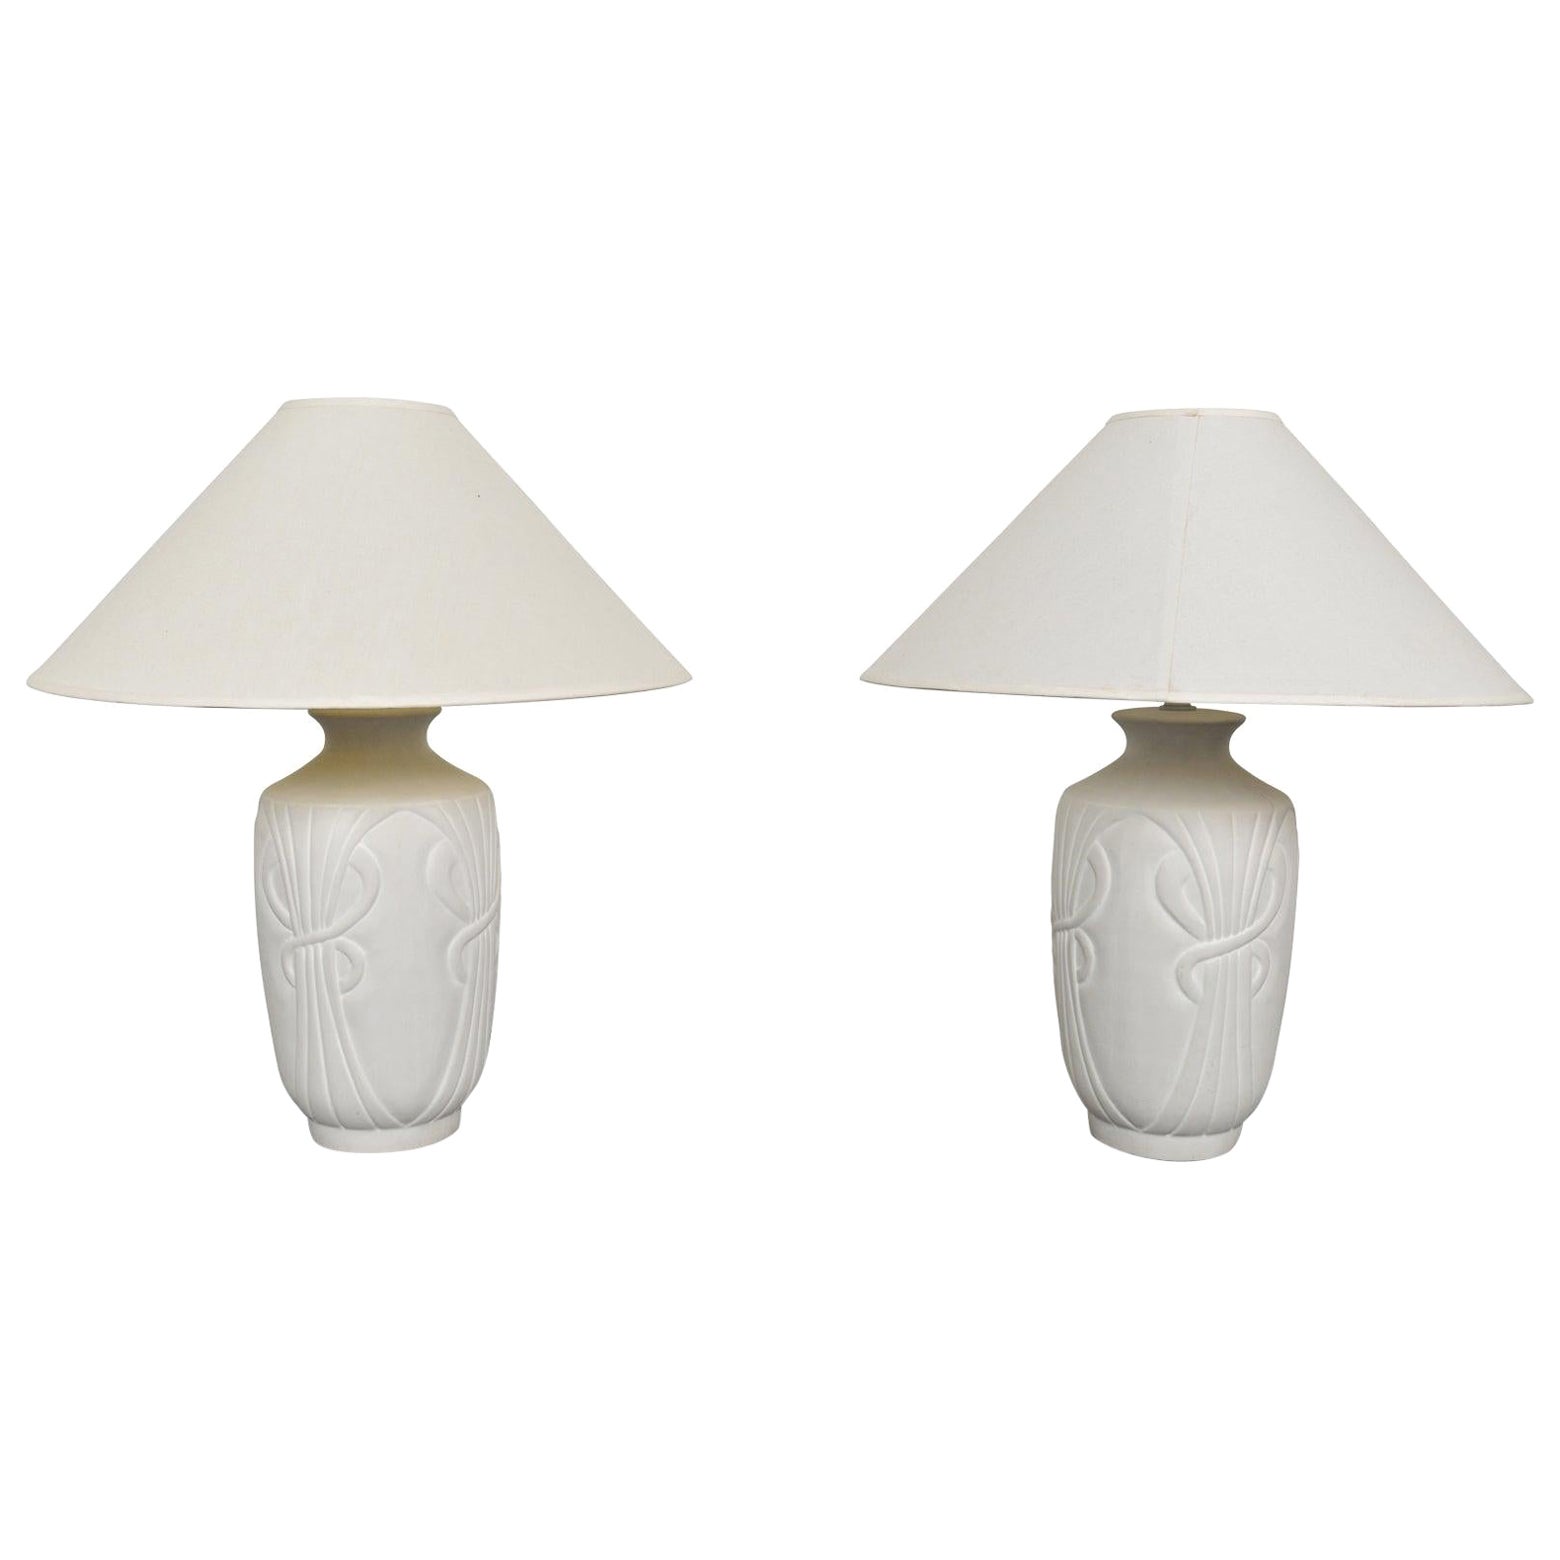 Pair of Post Modern Table Lamps by Sunset For Sale